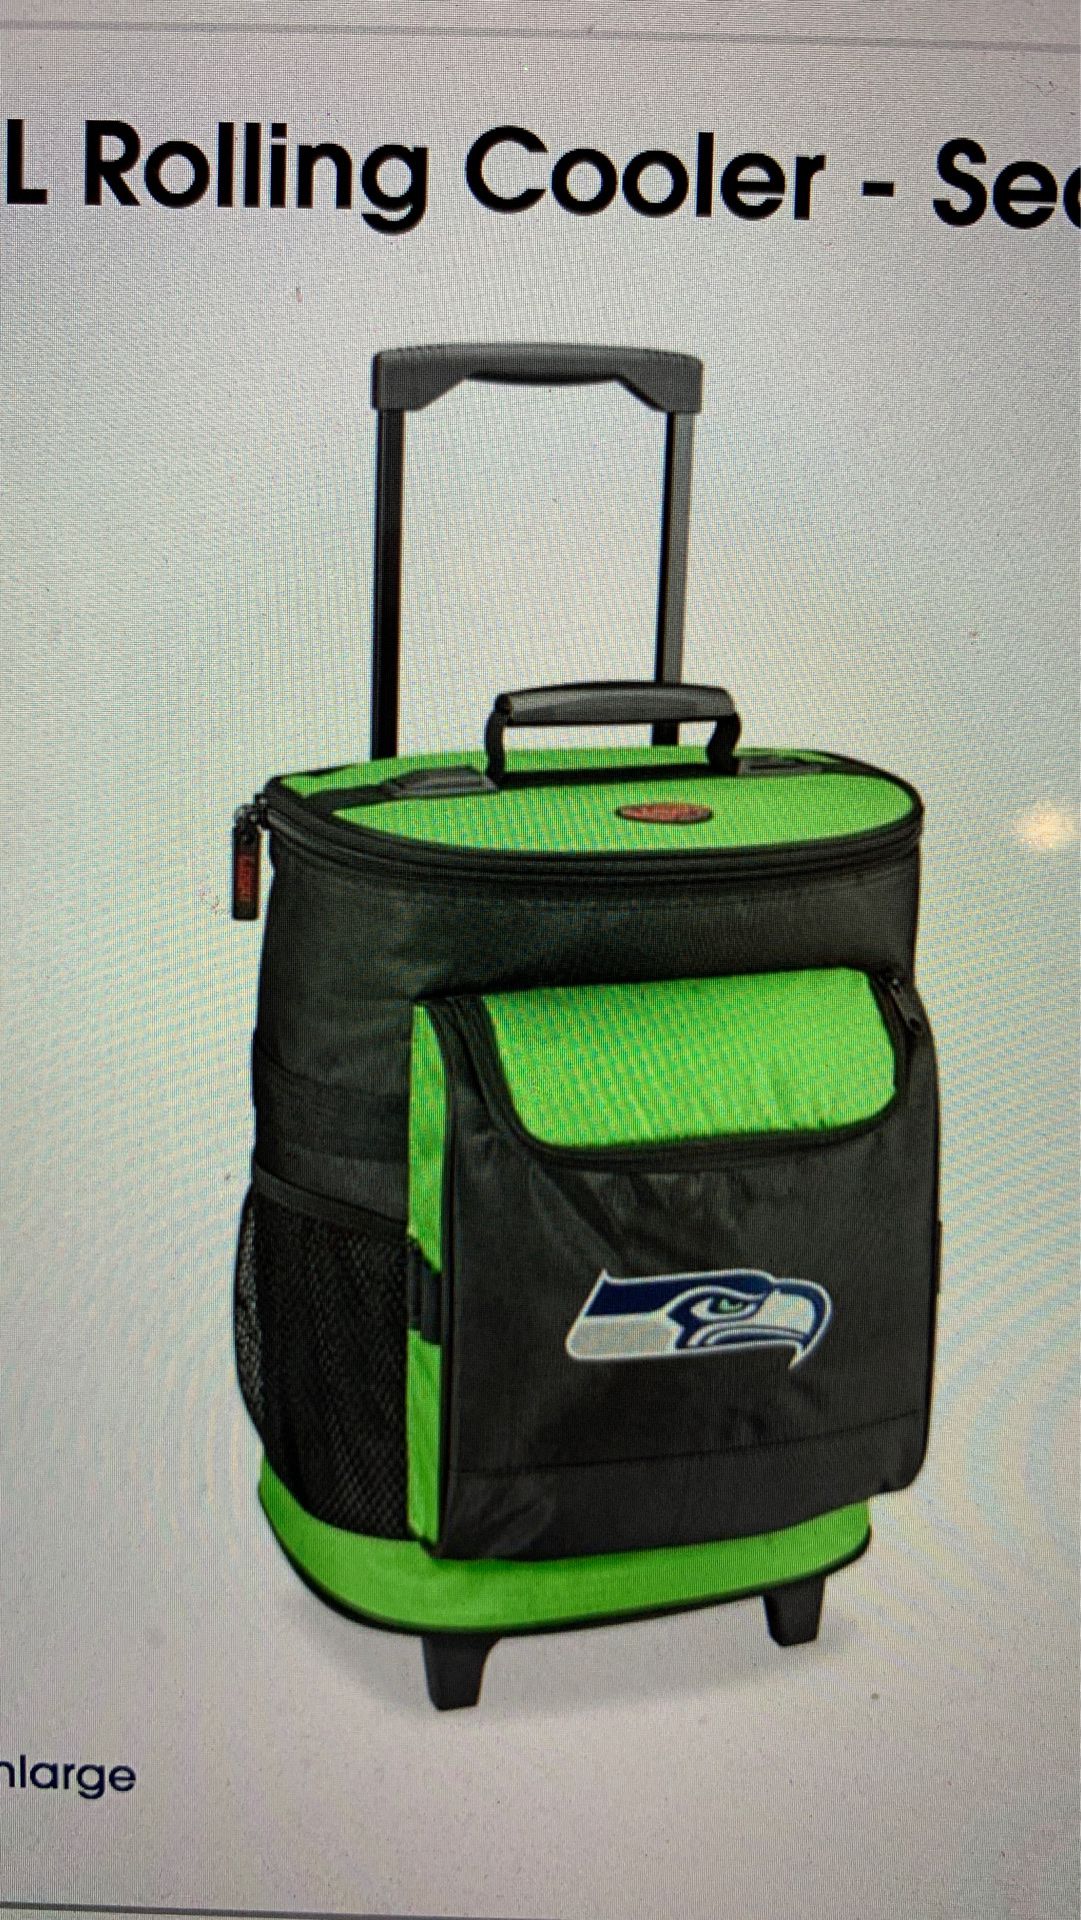 NFL Rolling Cooler - Seahawks / New in Box